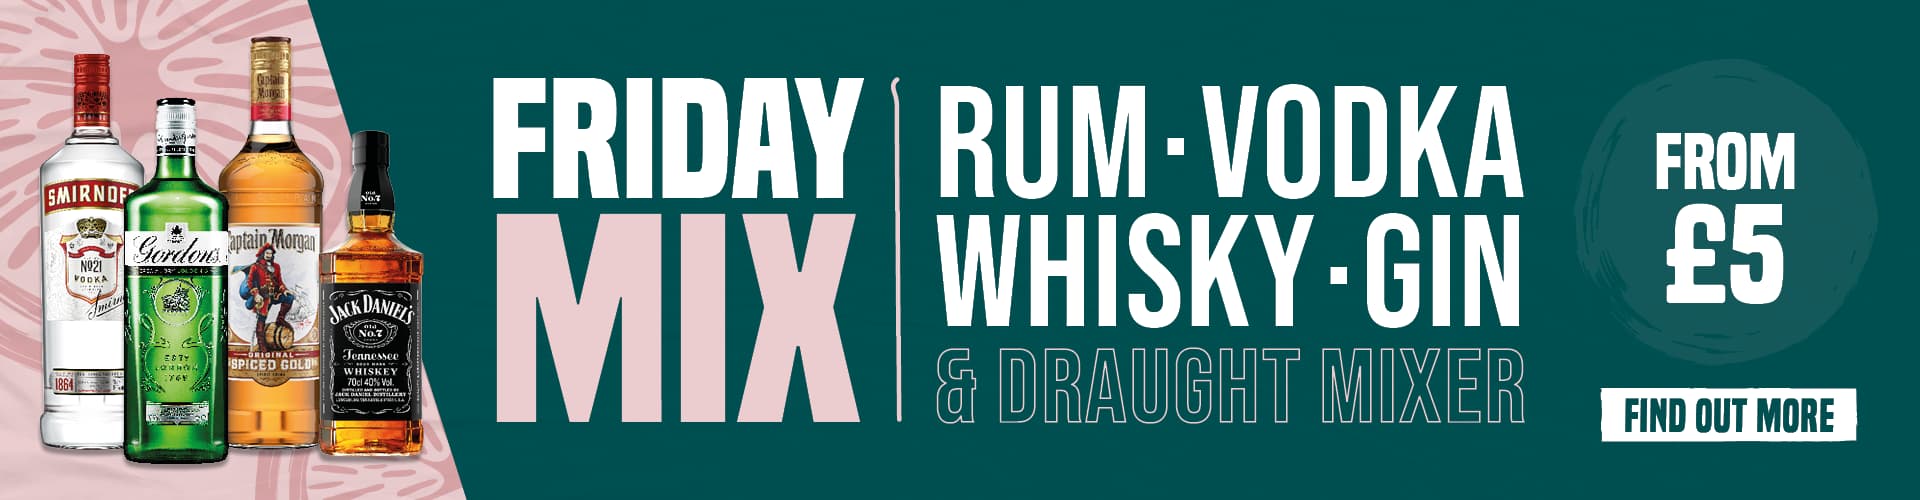 Friday Mix - Rum, Vodka, Whisky and Gin Mixers from £5. Find Out More.